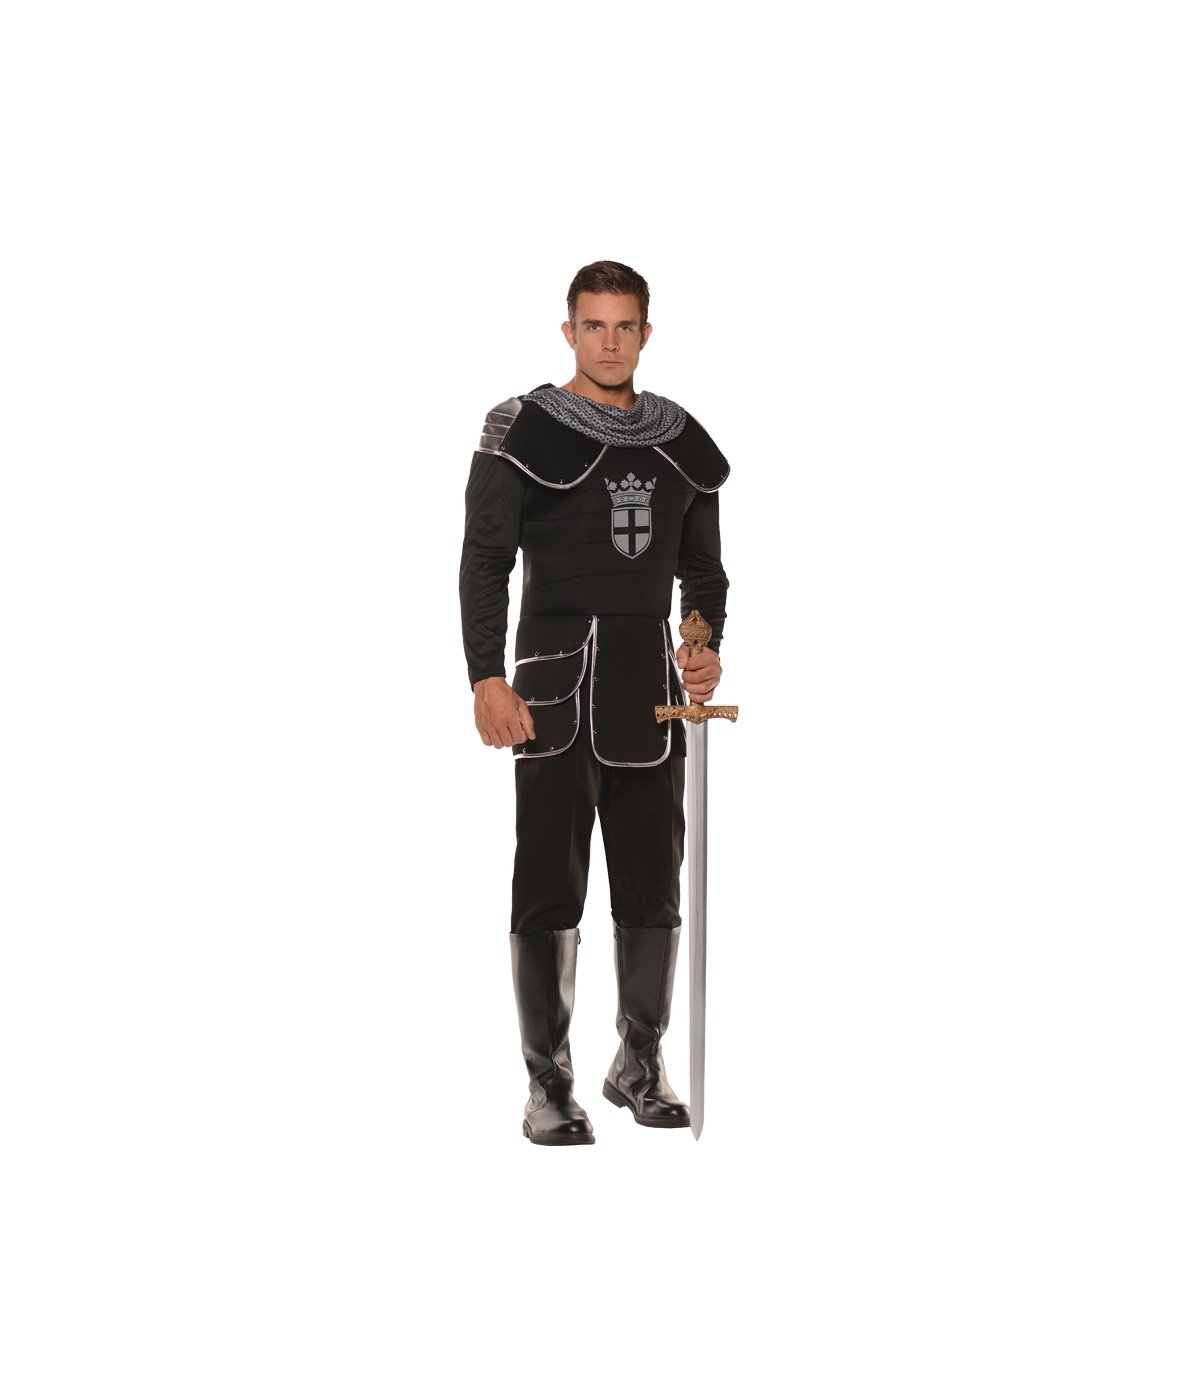  Mens Noble Knight Costume